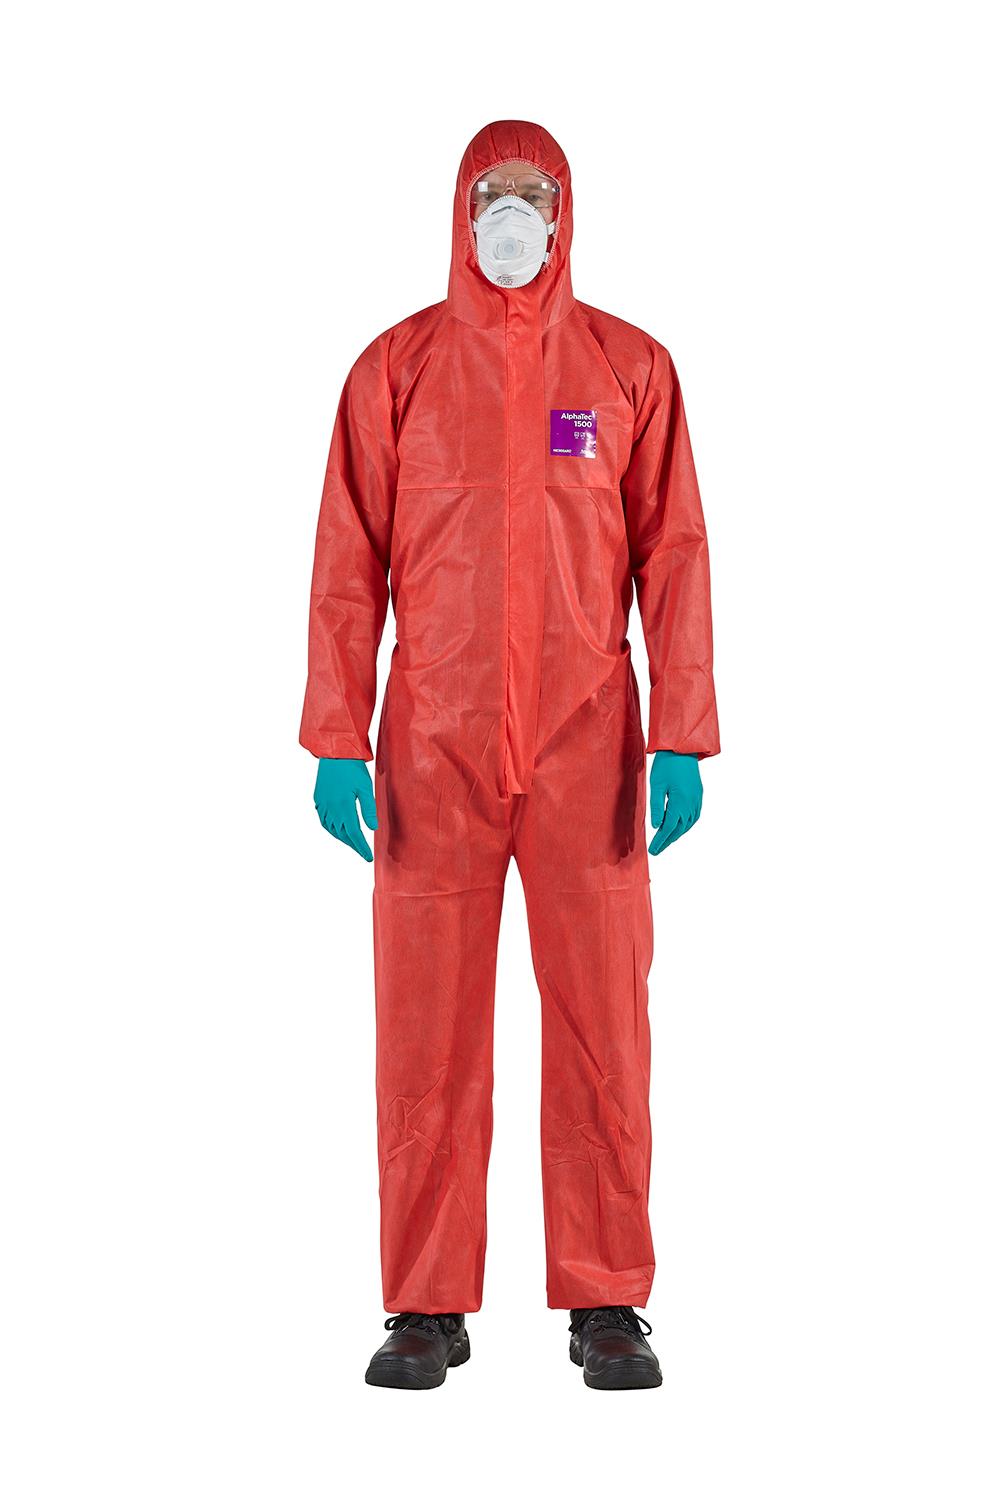 Ansell Alphatec red Type 5/6 dust/mist breathable hooded coverall #1500